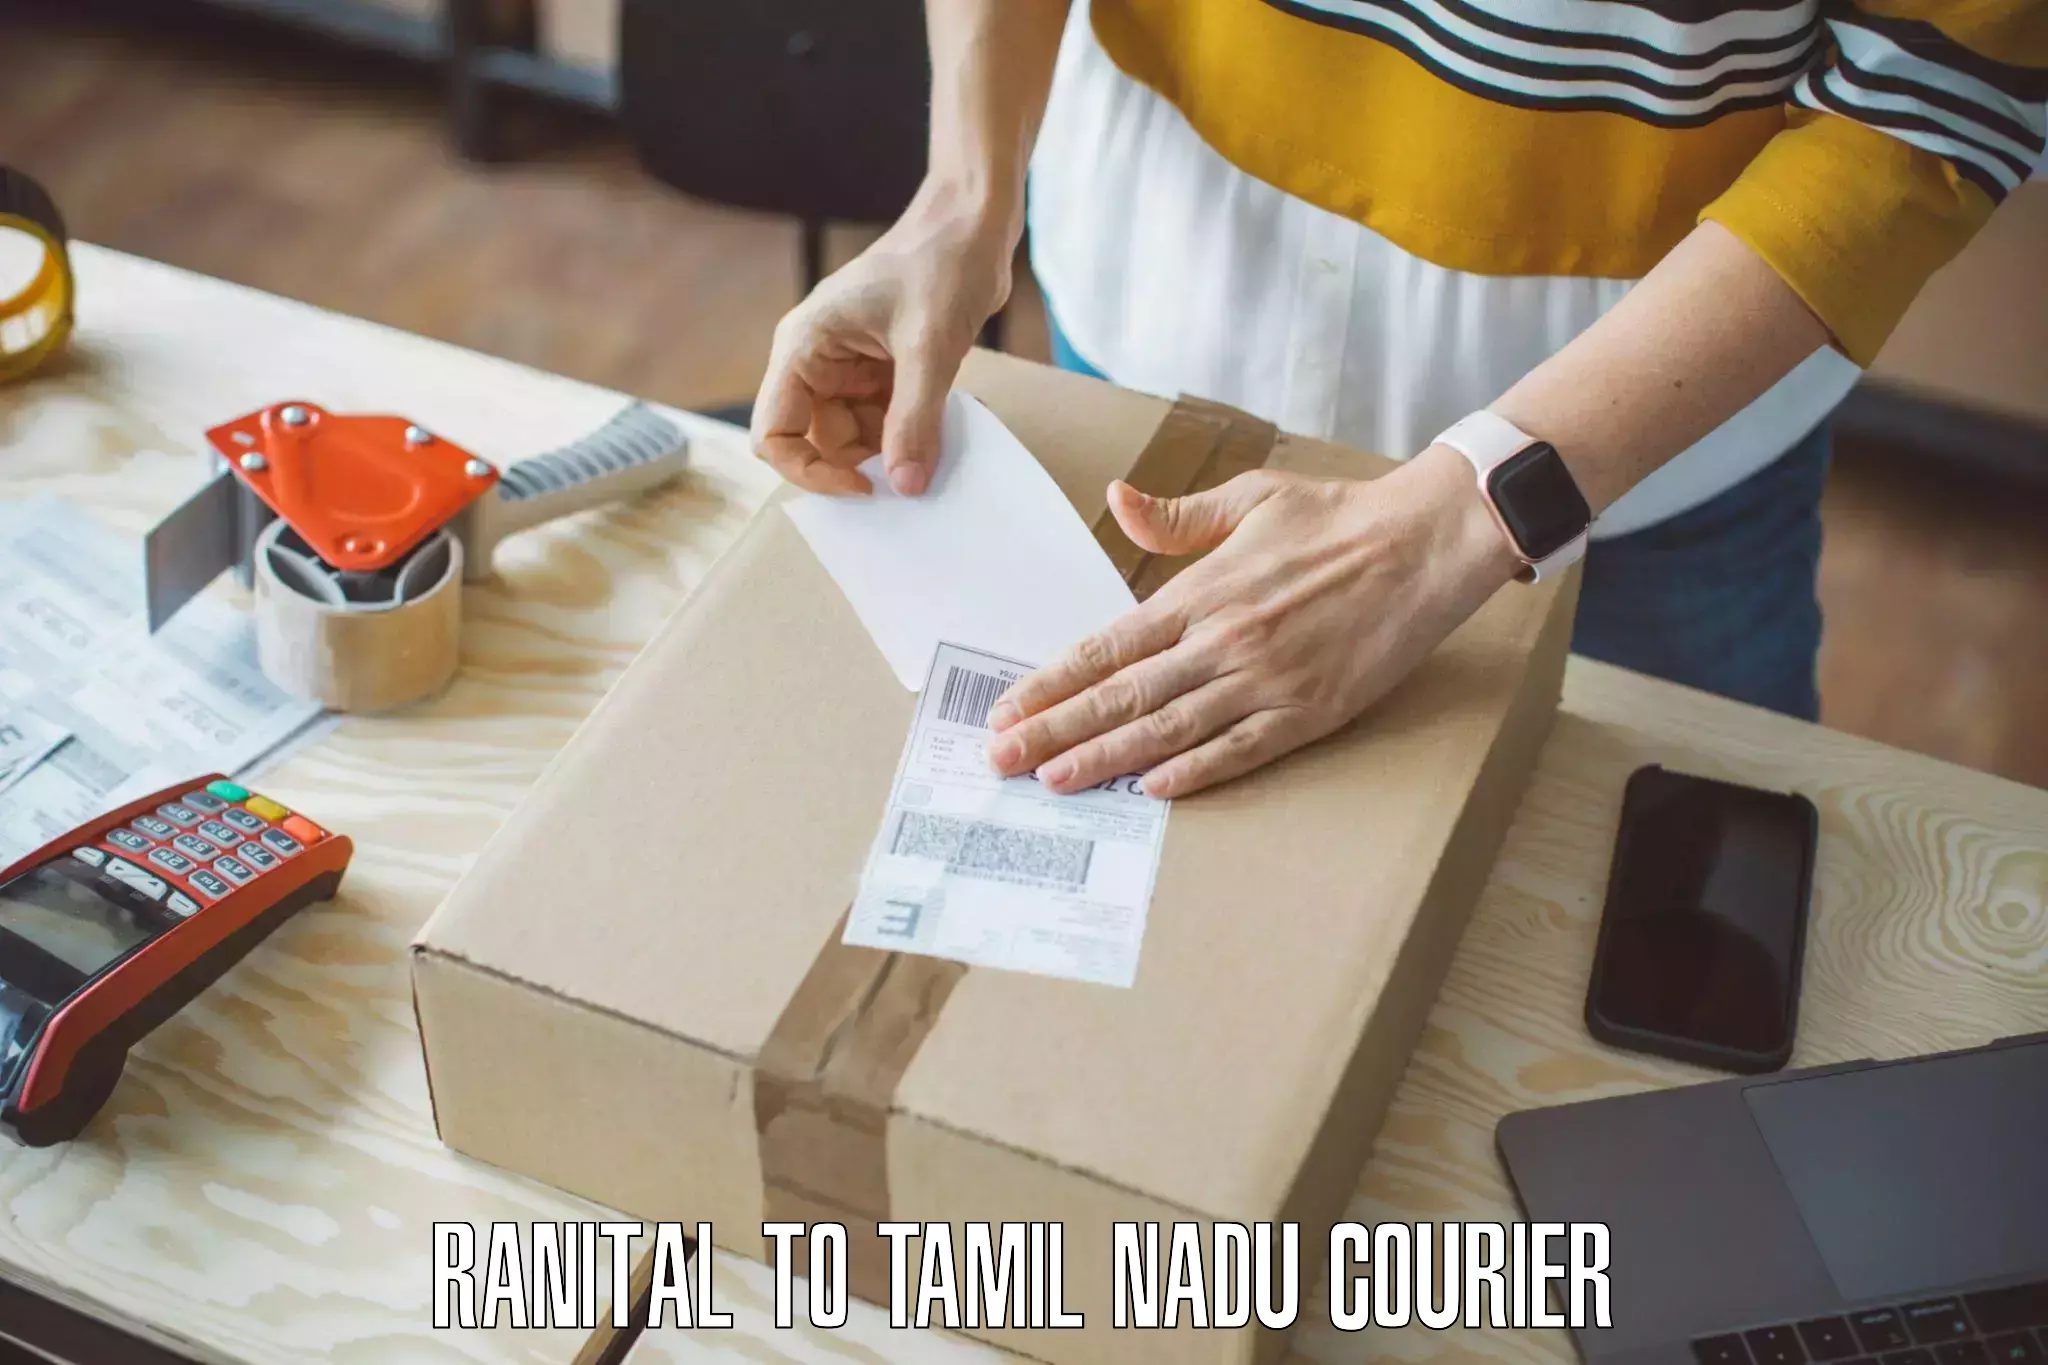 Professional moving assistance Ranital to Velur